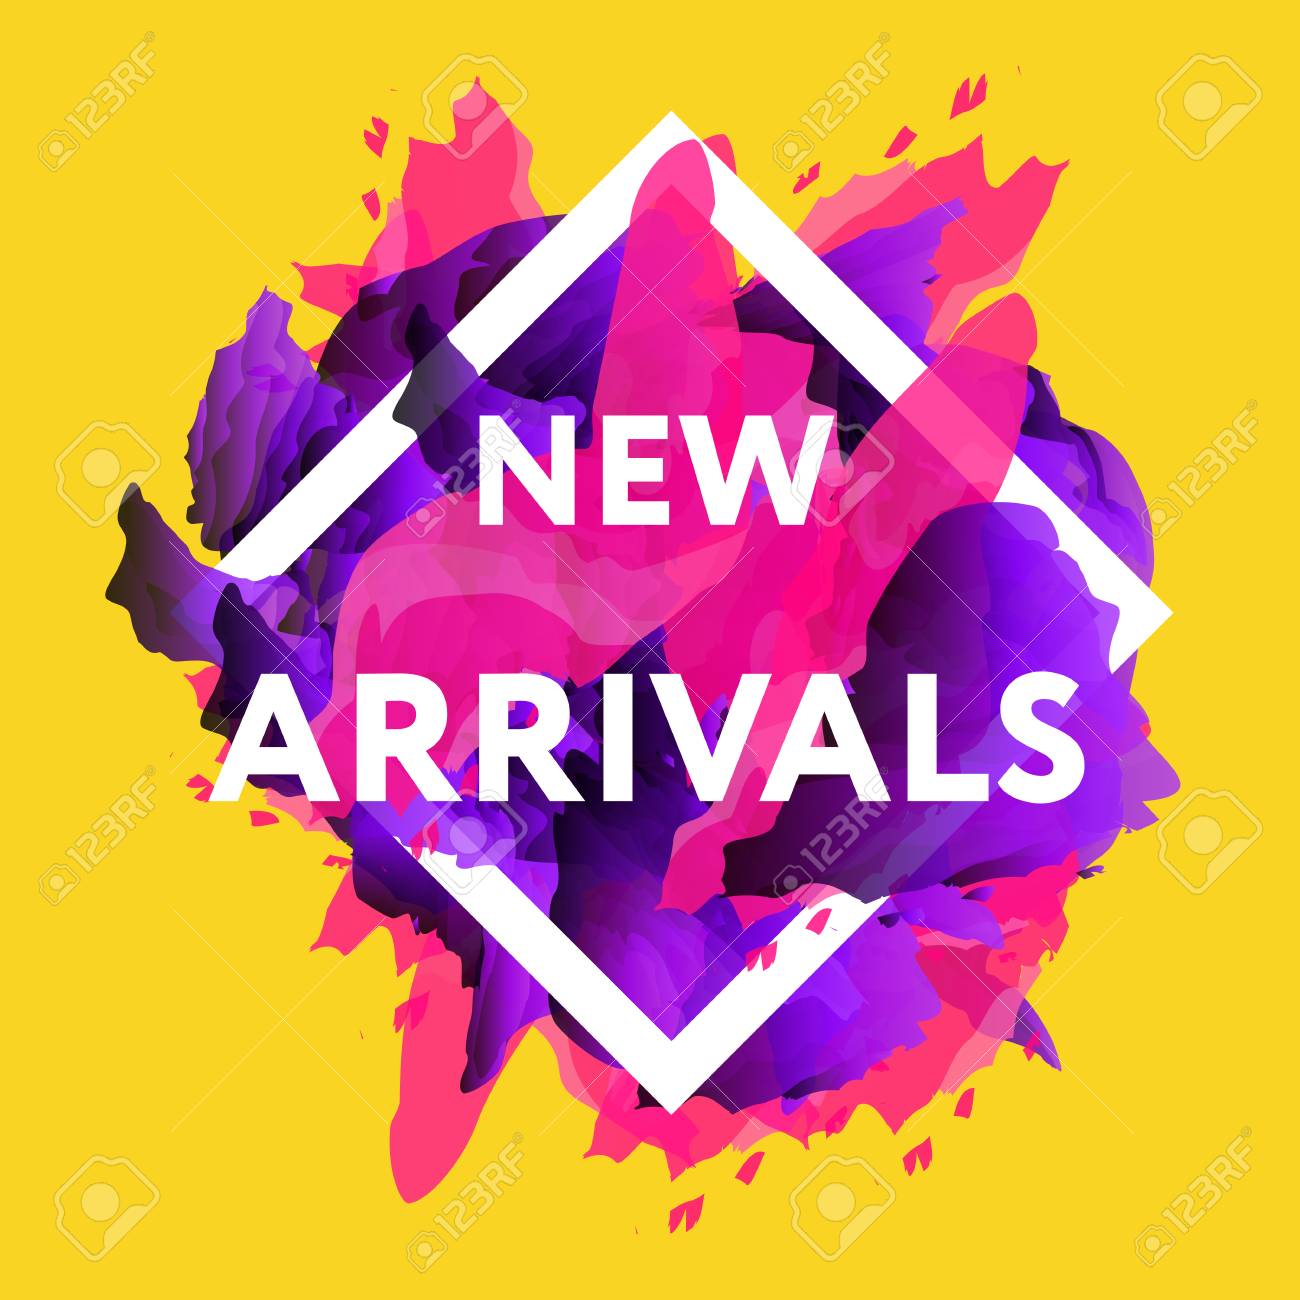 New Arrivals in Return Gifts